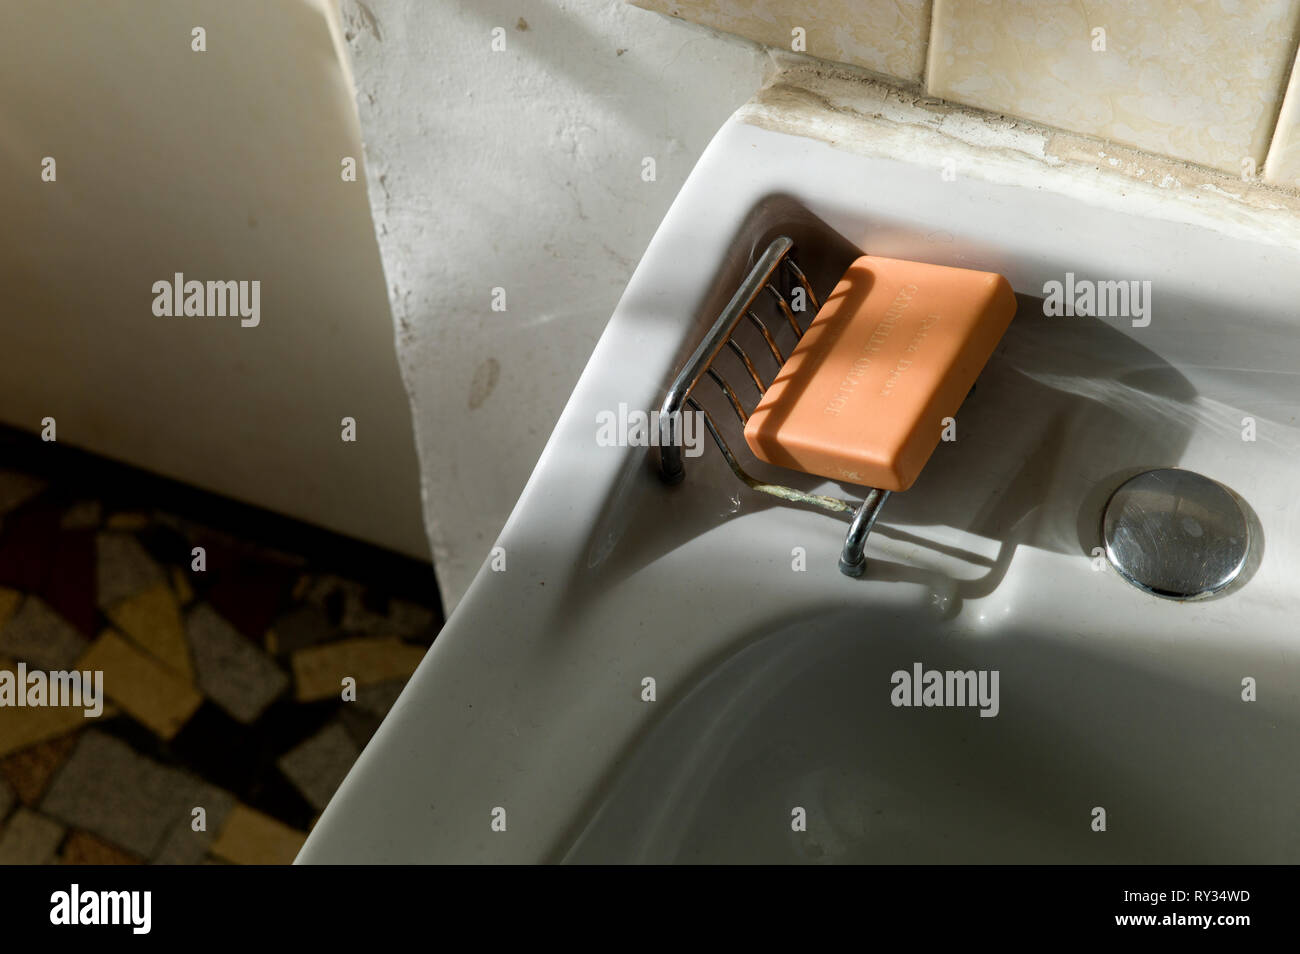 New bar of soap in old bathroom in sunlight Stock Photo